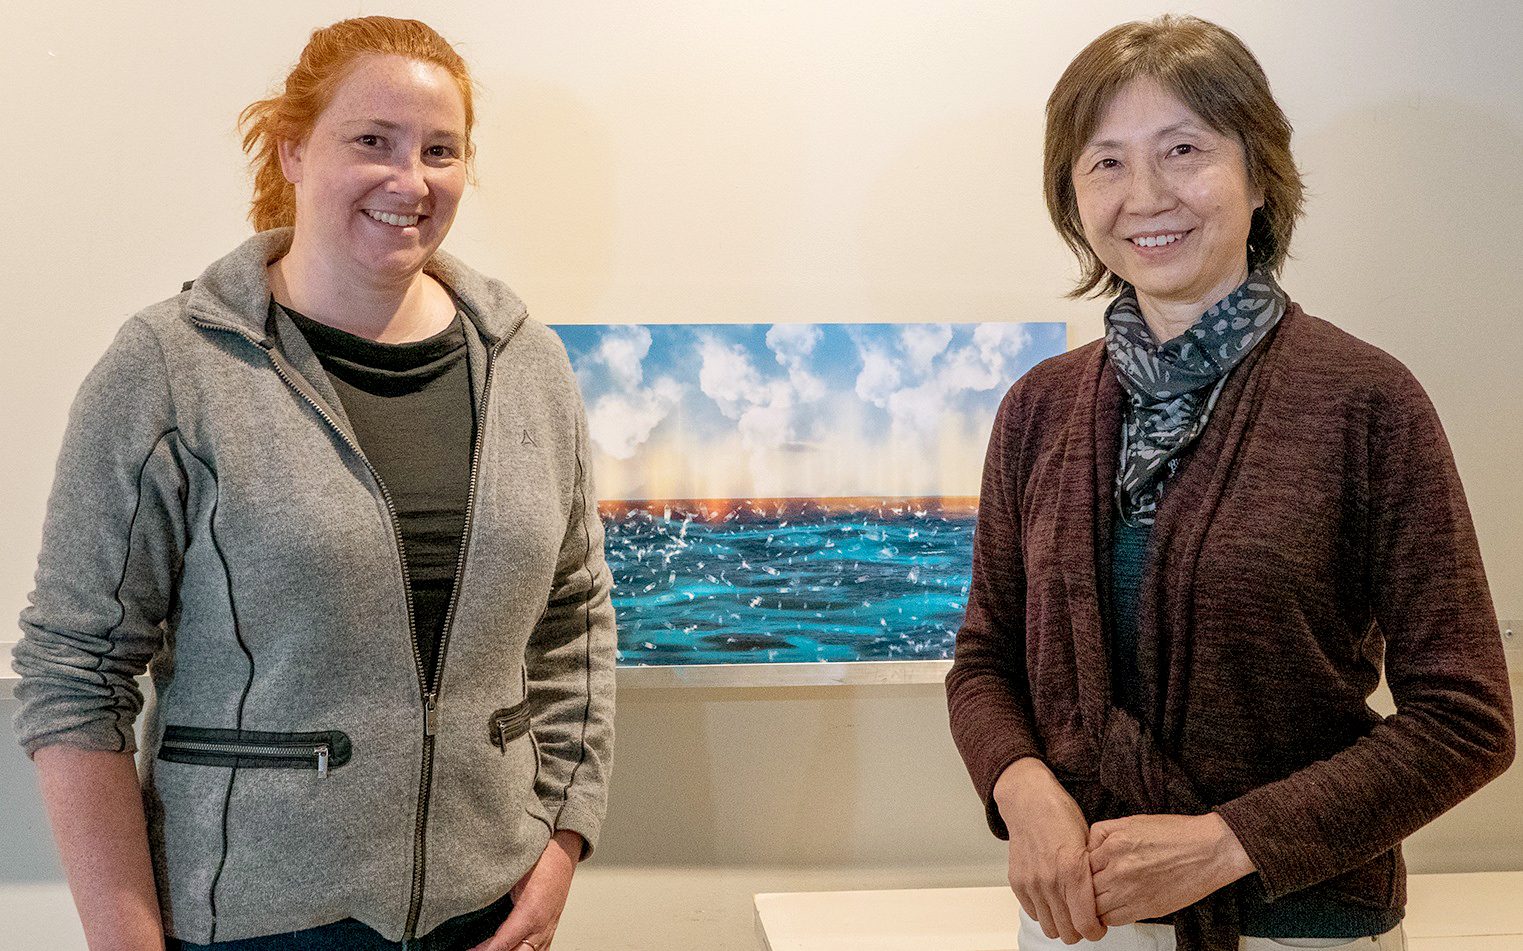 WHOI physical oceanographer Caroline Ummenhofer (left) and Rhode Island-based artist Hong Xu pose with Xu's painting "Surfacing Basic Elements" at a Falmouth Art Center exhibition in May 2021. (Photo by Ruth Clegg)